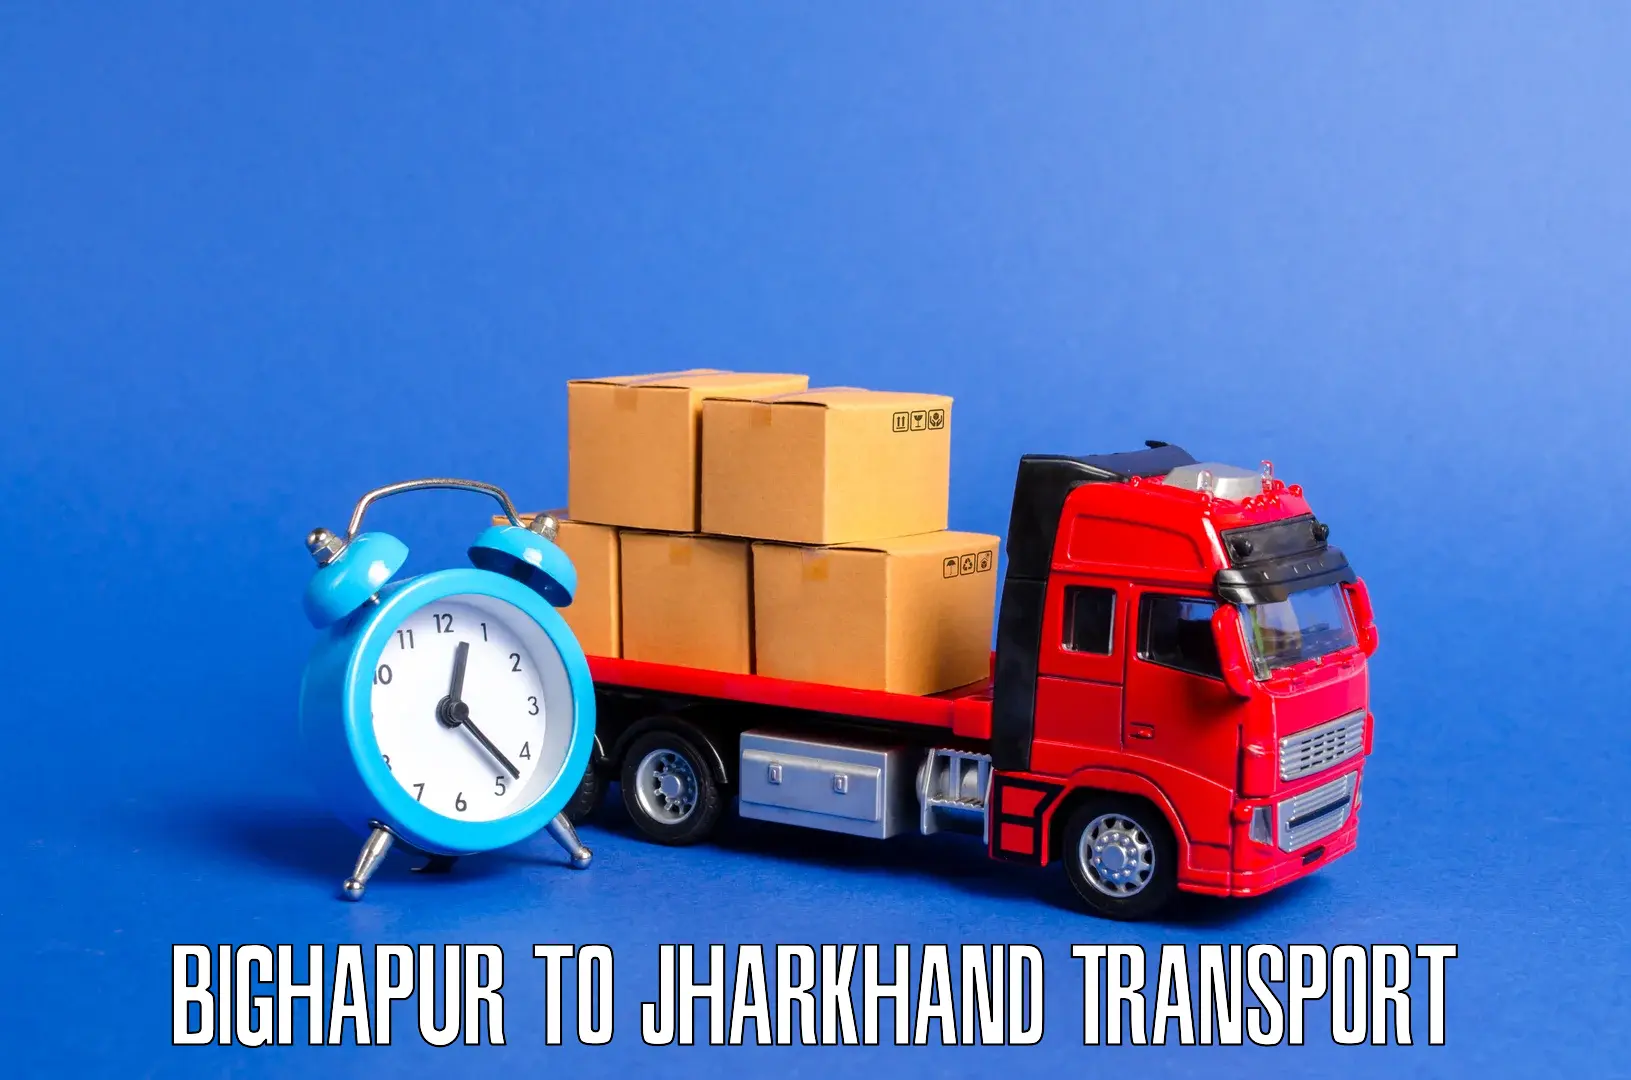 Delivery service Bighapur to Ranchi